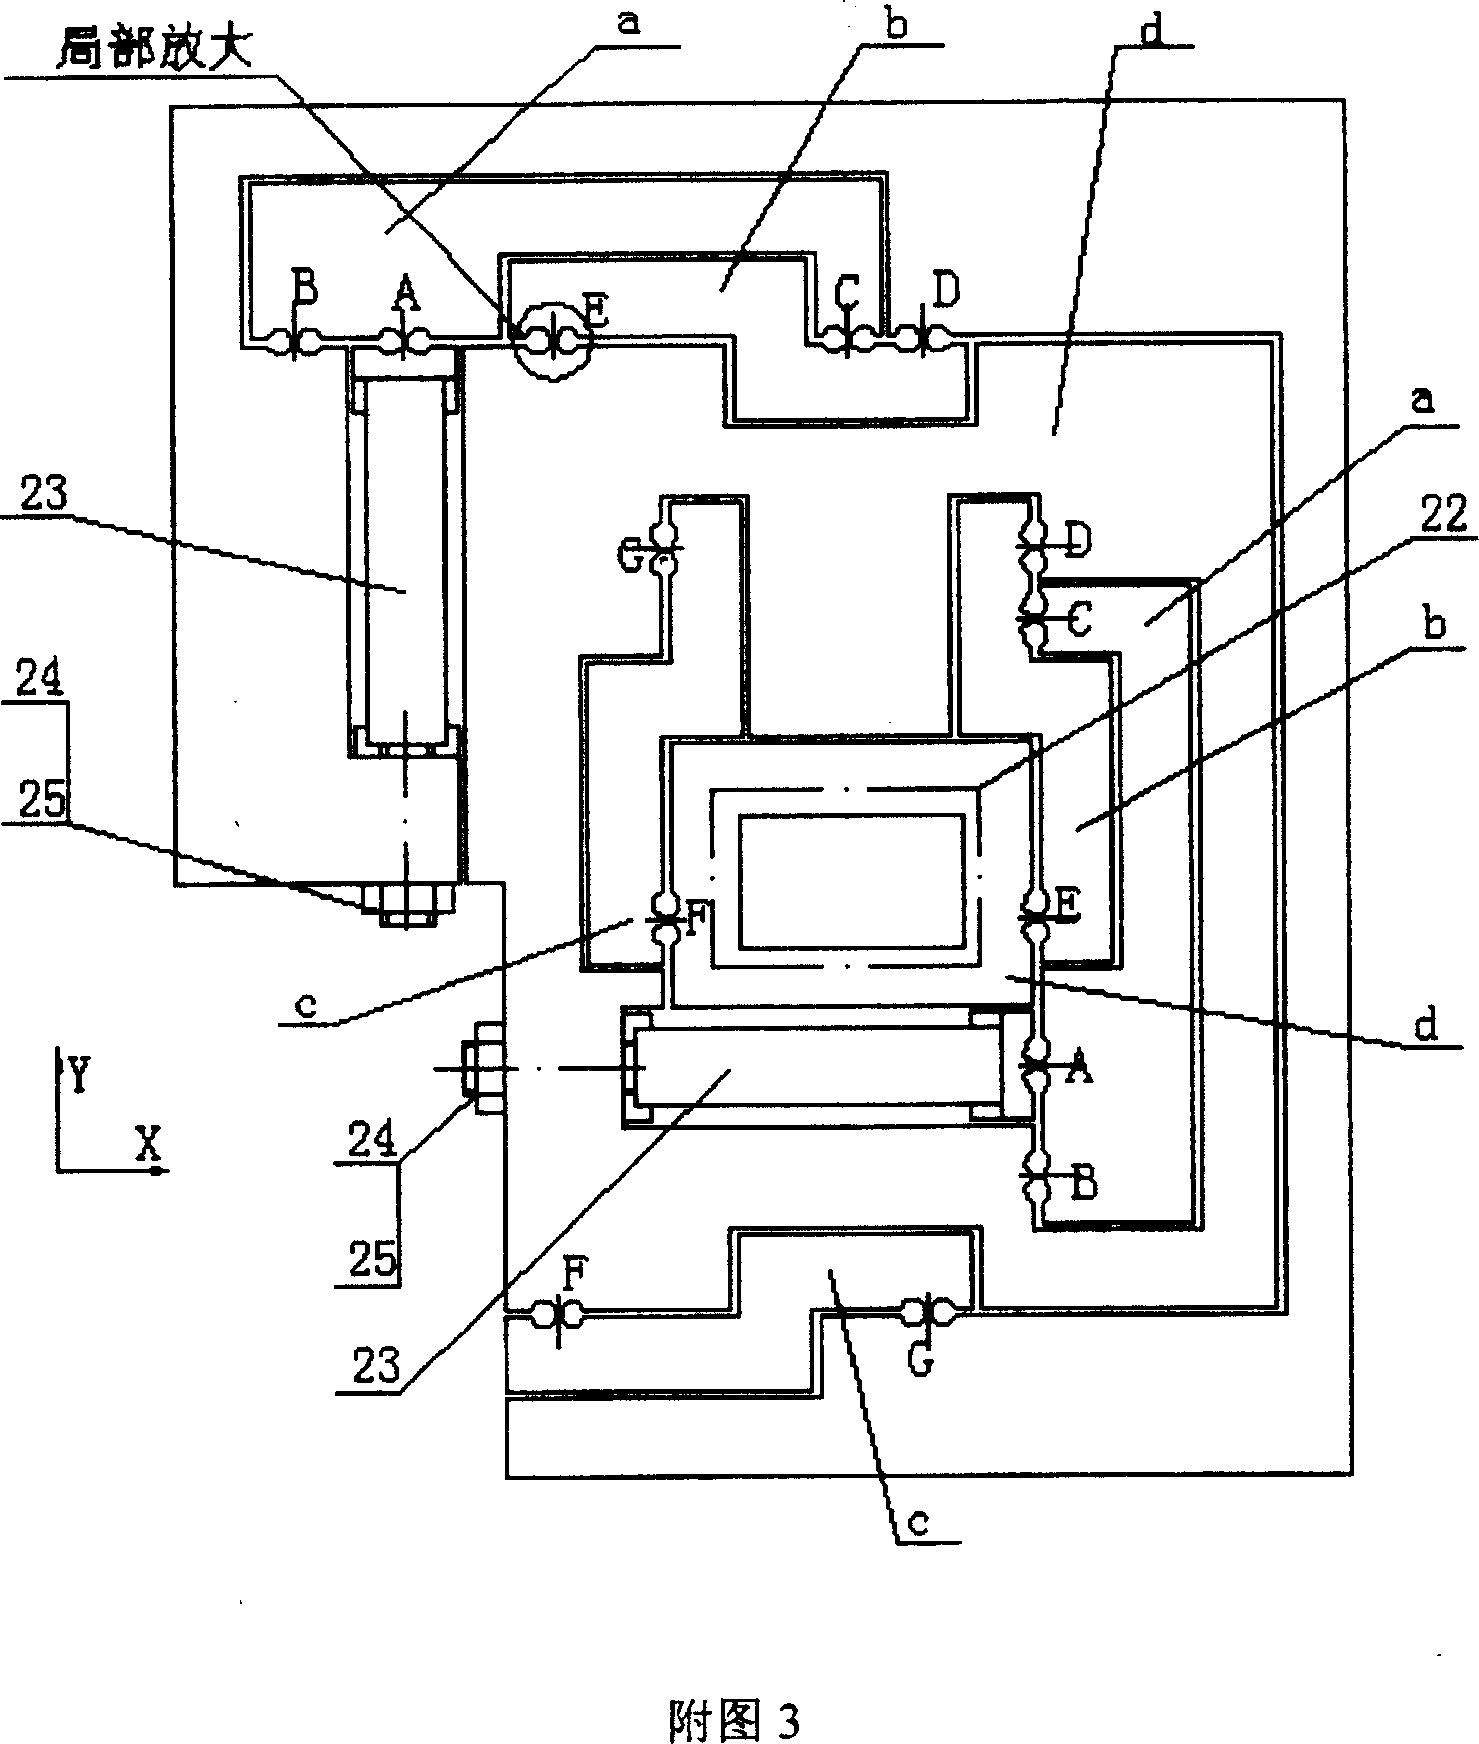 Two-photon-confocal optical manufacturing equipment for 3D micromachining or high-density information storage and method thereof